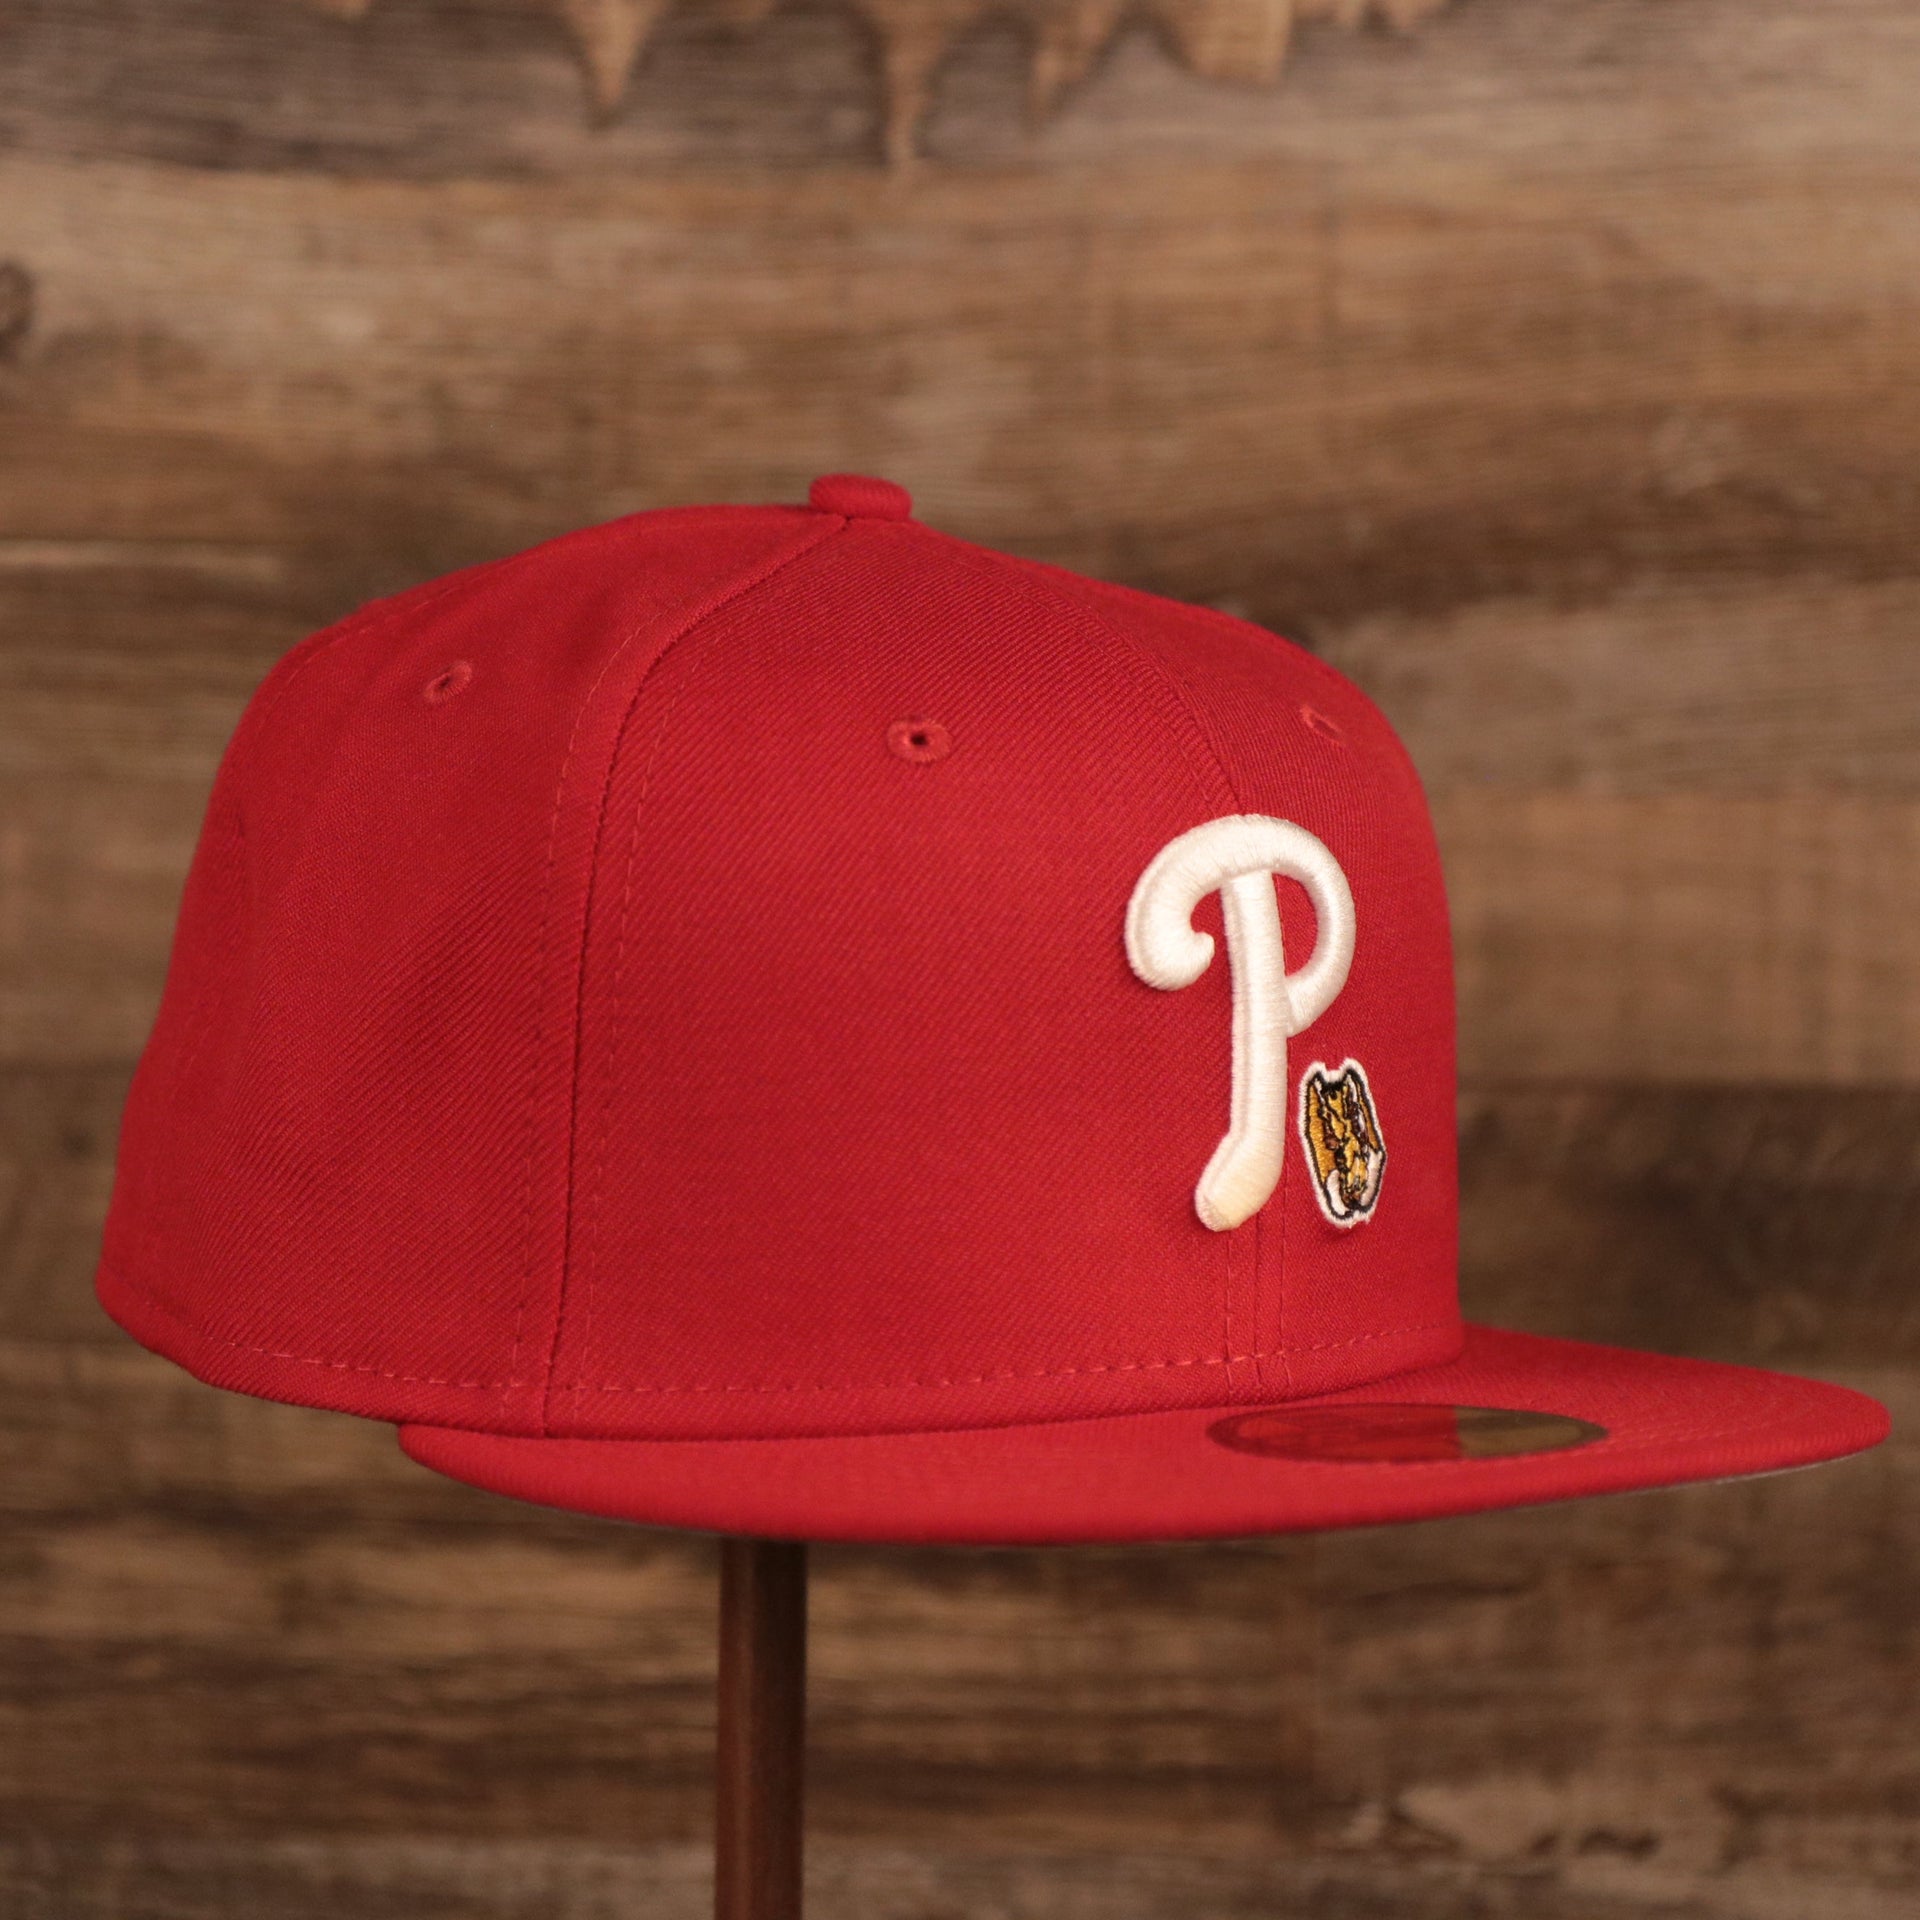 The Philly Cheesesteak red Philadelphia Phillies side patch fitted cap.